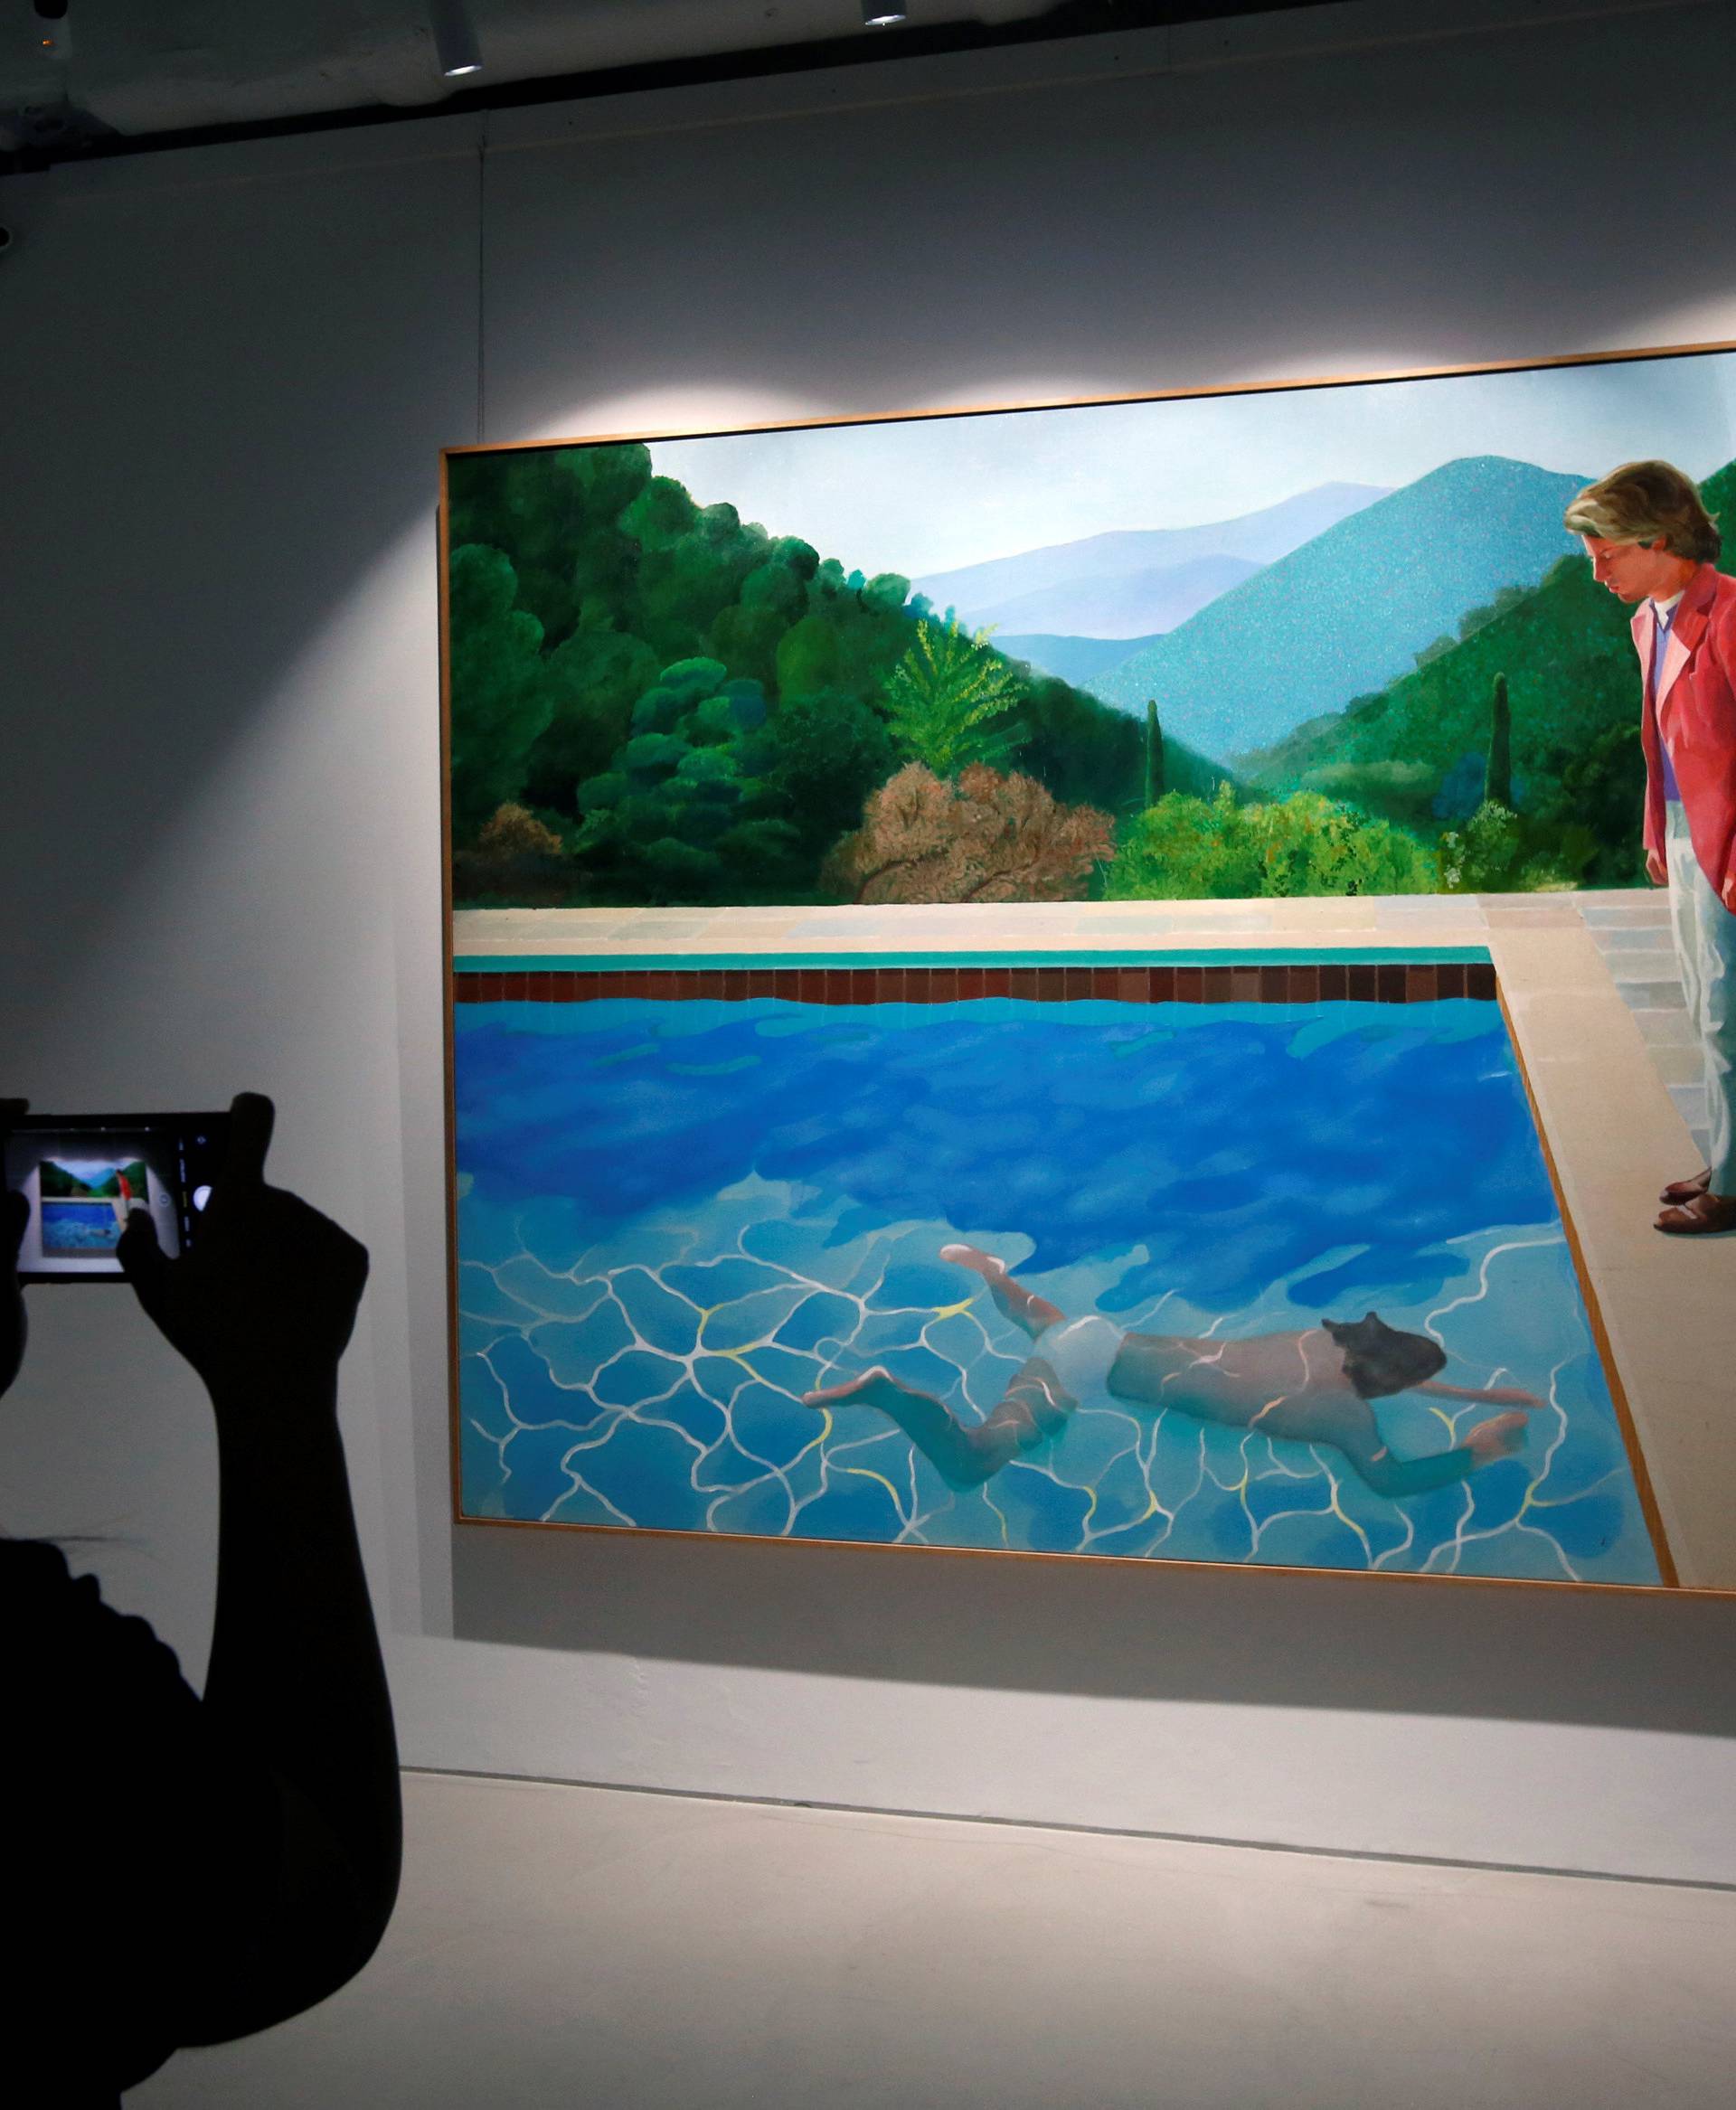 David Hockney's "Portrait of an Artist (Pool with Two Figures)" is displayed at Christie's preview in Hong Kong